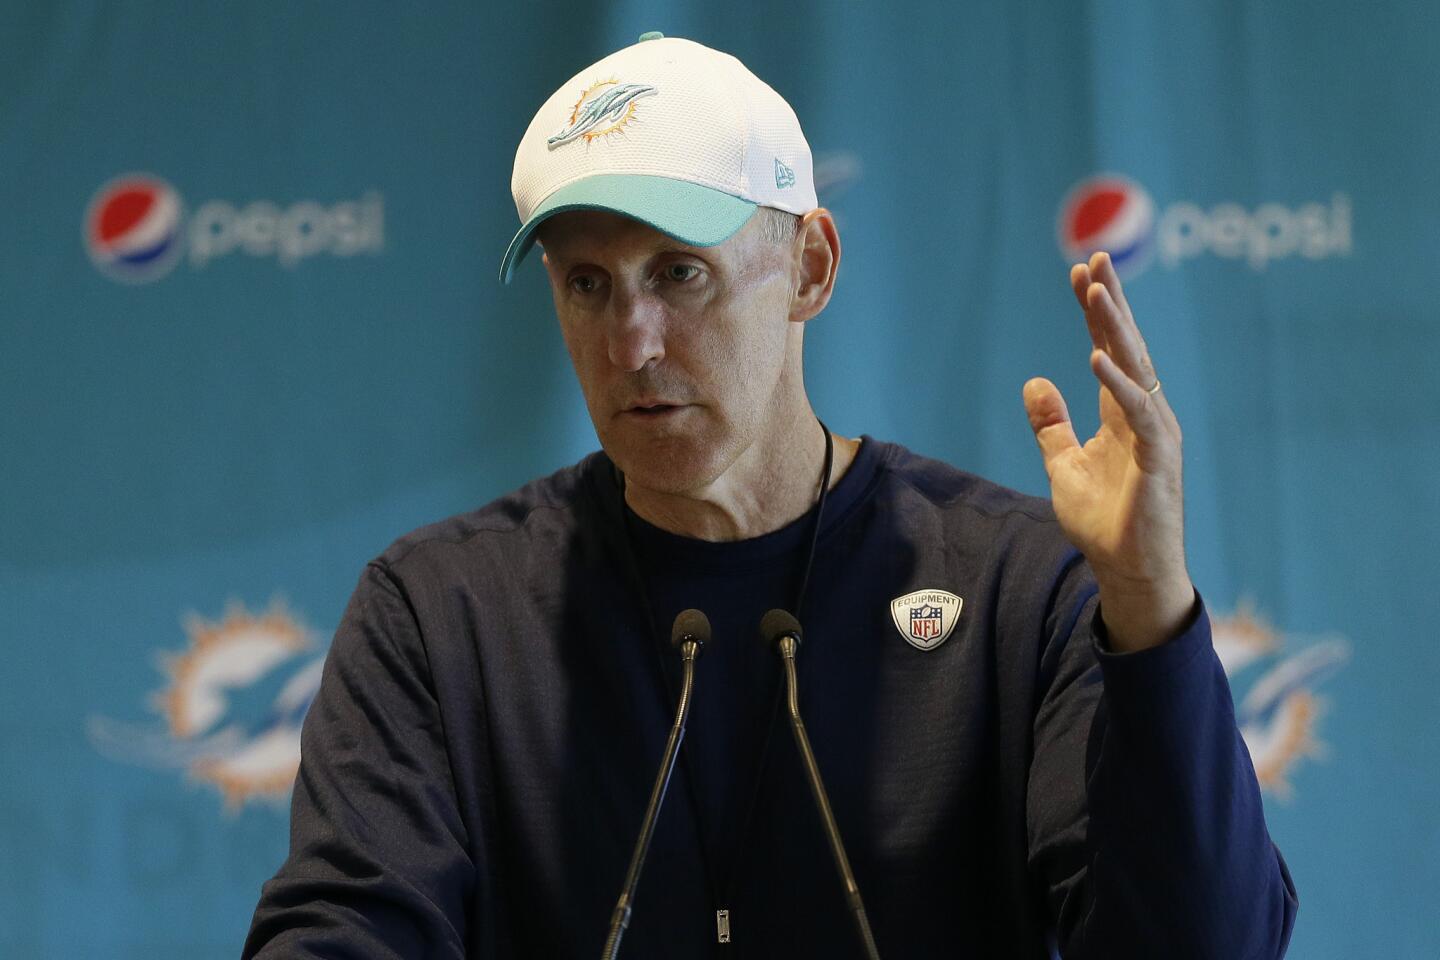 Miami Dolphins head coach Joe Philbin speaks during a press conference at Allianz Park in London, Friday Oct. 2, 2015. The Dolphins are preparing for an NFL football game against the New York Jets at London's Wembley stadium on Sunday. (AP Photo/Tim Ireland)